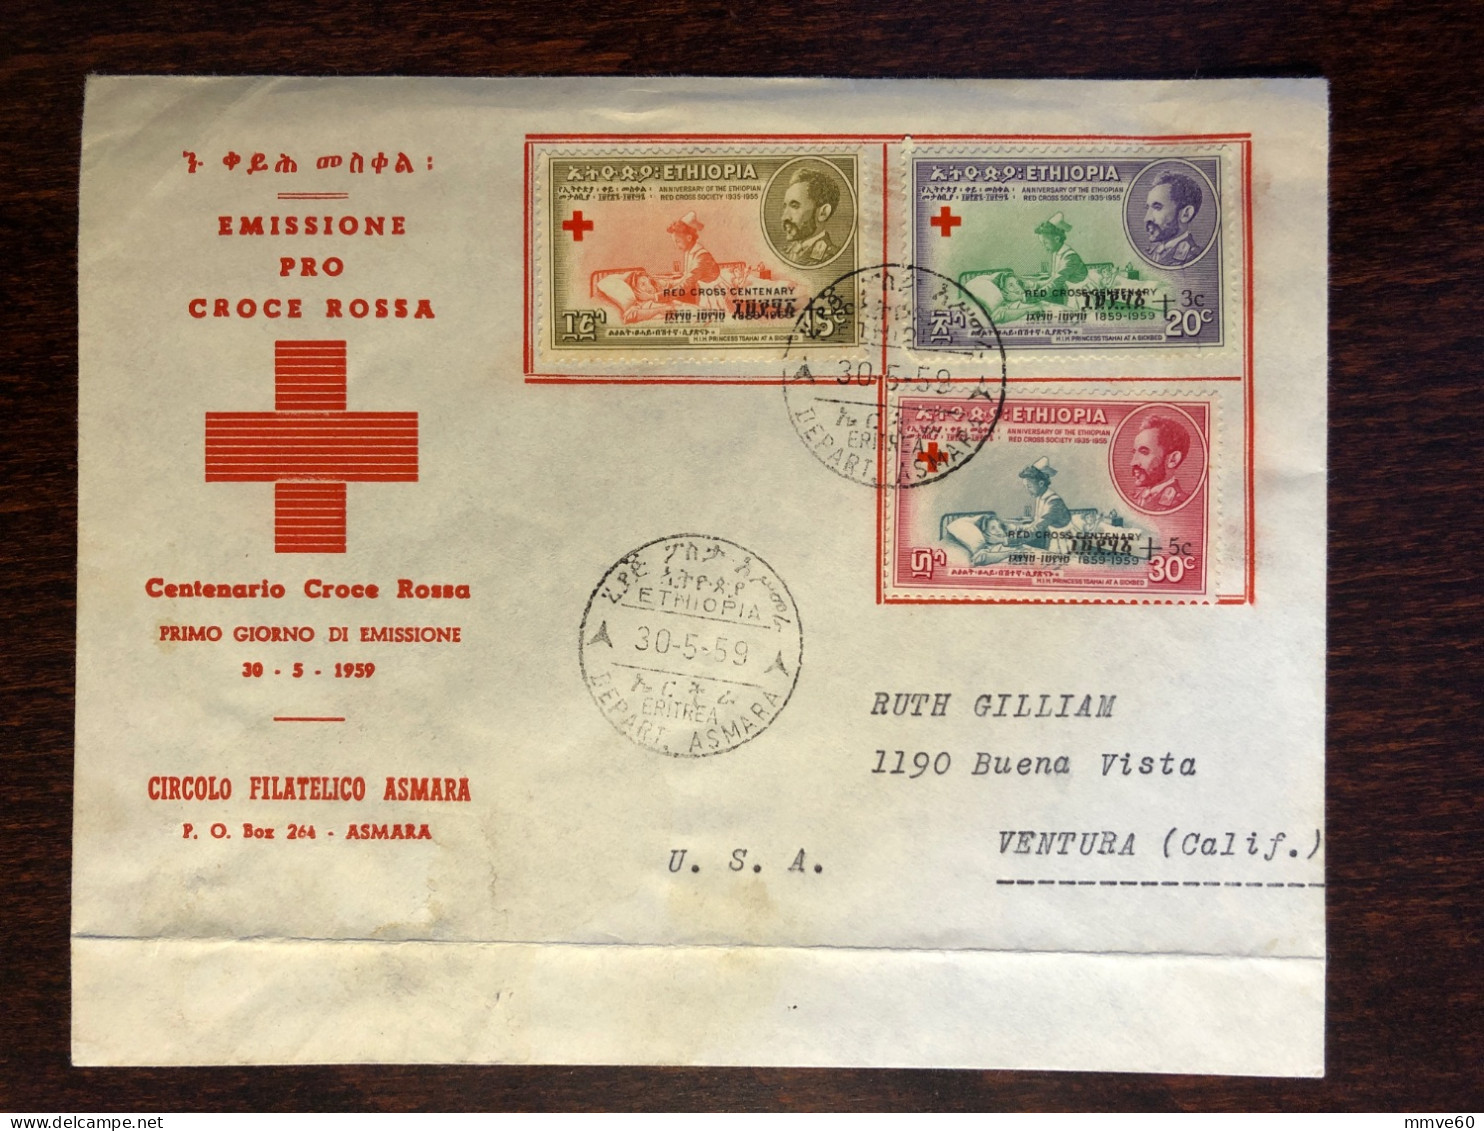 ETHIOPIA FDC COVER 1959 YEAR RED CROSS HEALTH MEDICINE STAMPS - Etiopia